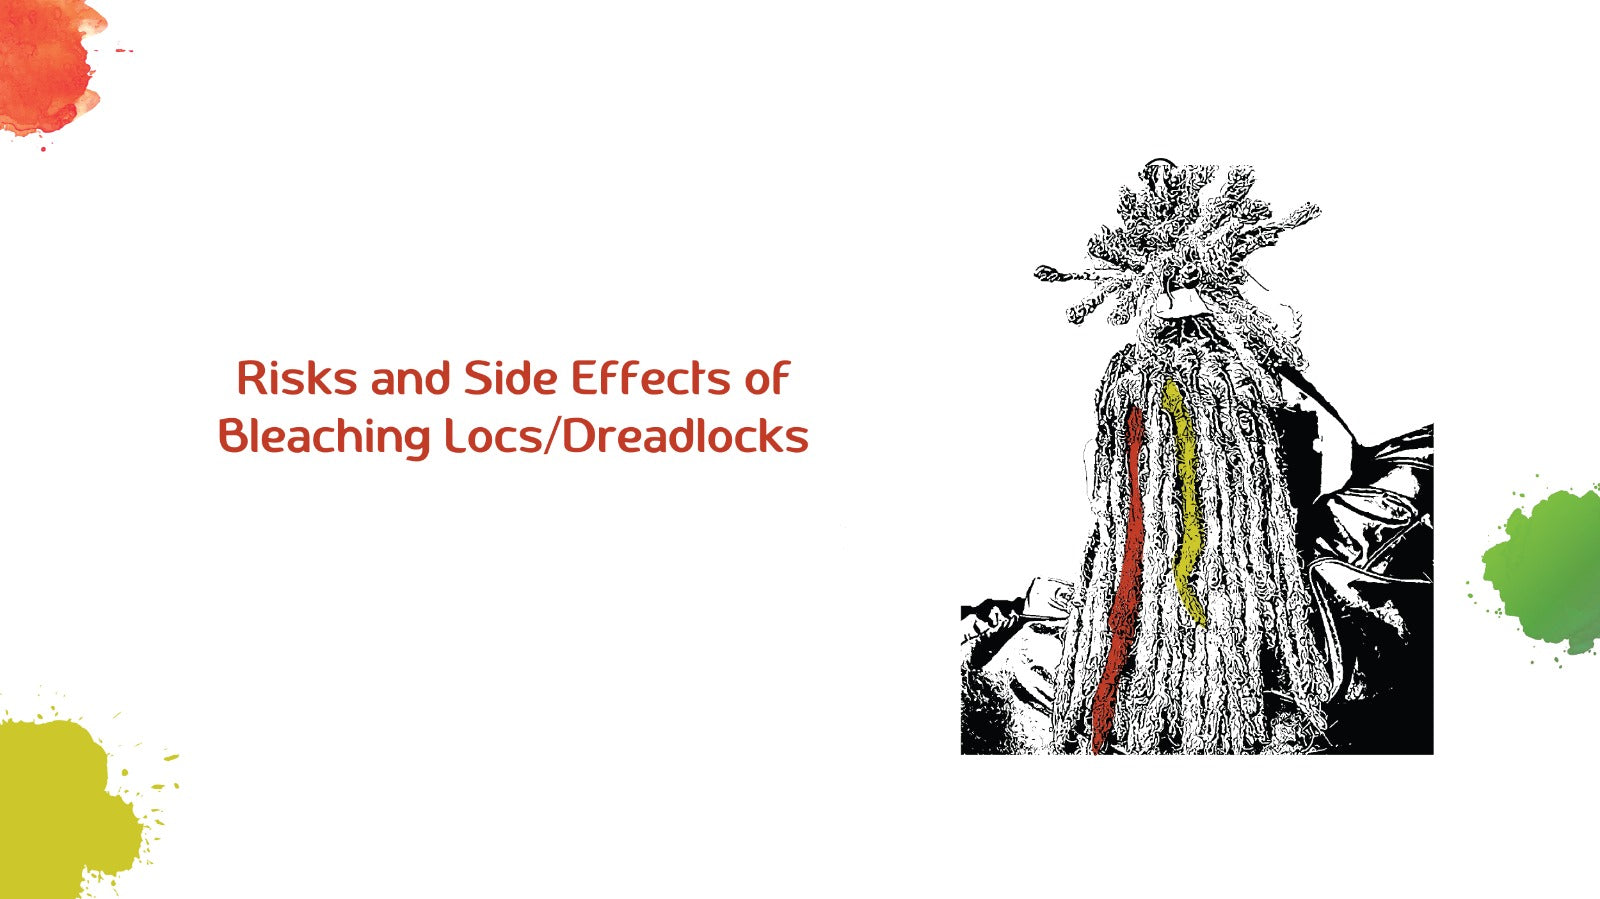 Risks and Side Effects of Bleaching Locs/Dreadlocks